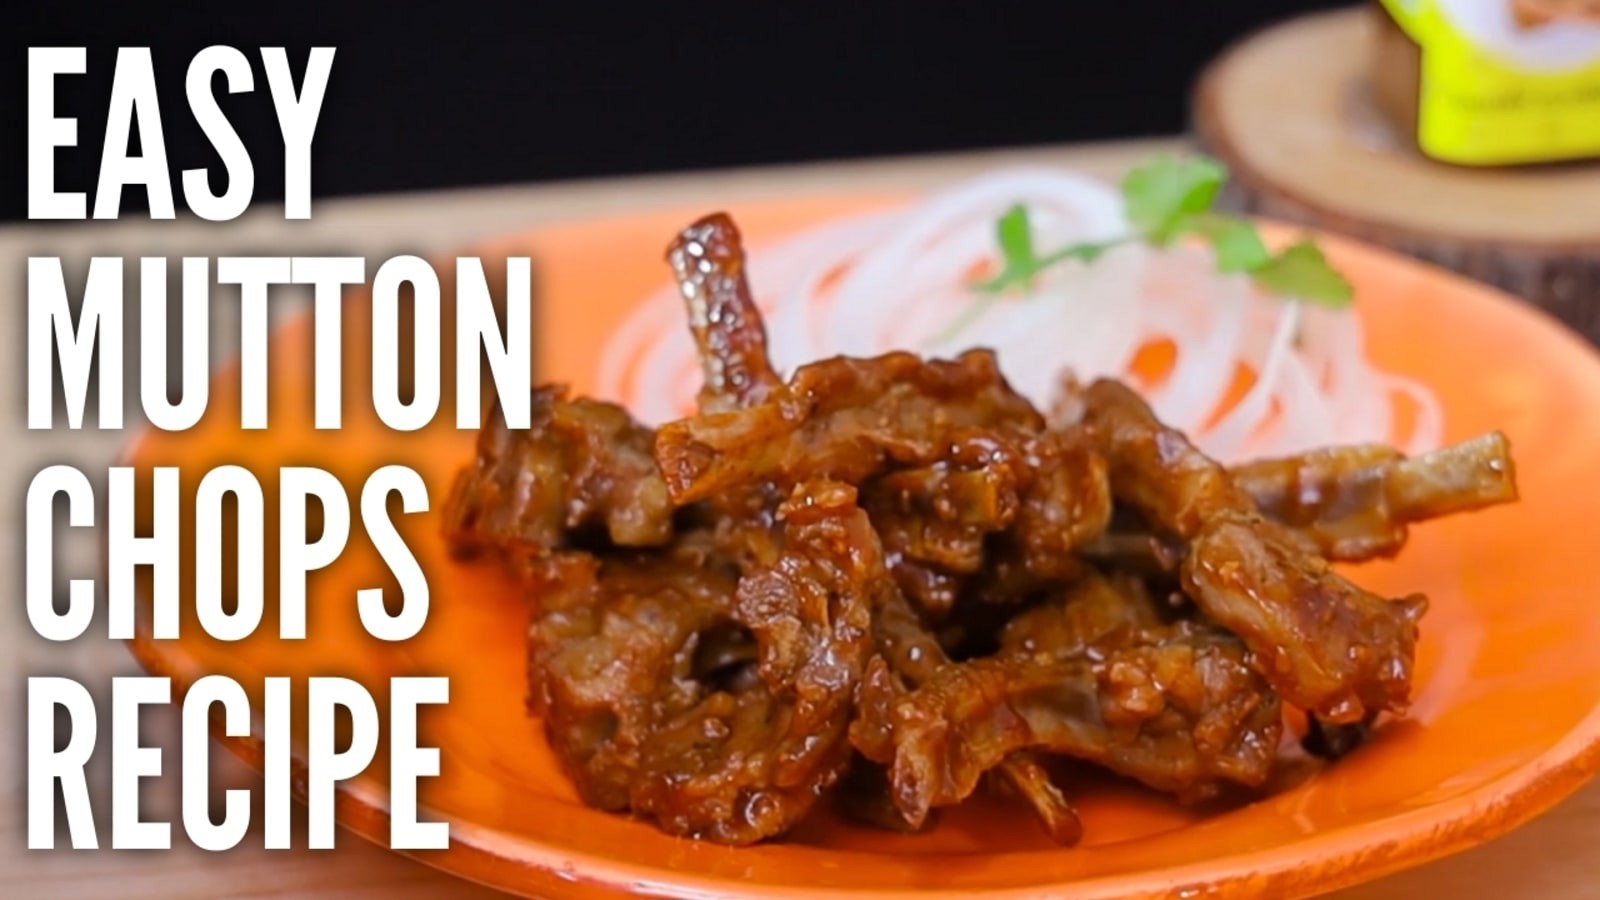 Image of Barbeque Grilled Mutton Chop| Smoky zingy Mutton Chops for Dinner party : बर्बेके ग्रिल्ड मटन चोप 